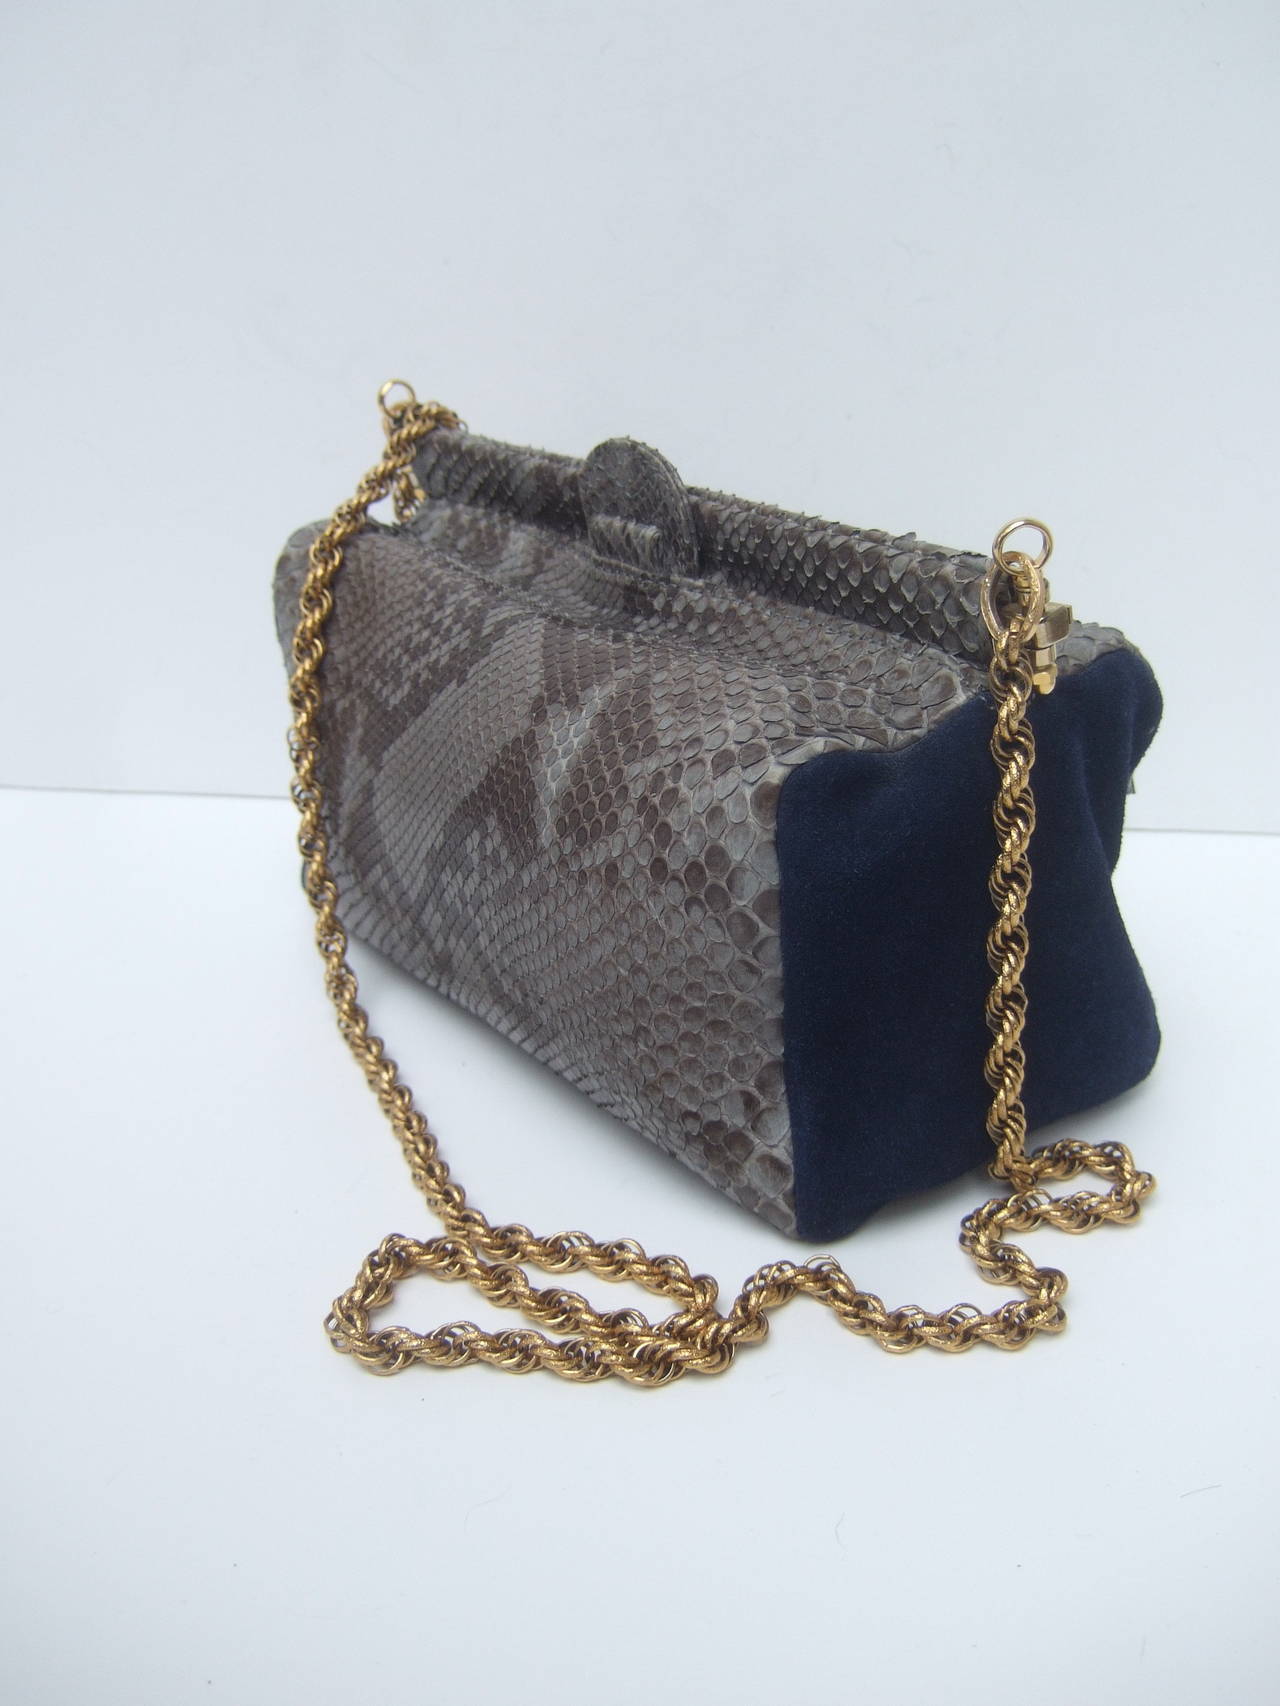 Exotic python & suede handbag designed by Meredith Wendell Italy 
The unique shoulder bag is covered with two tone gray python skin with plush blue suede side panels

The Italian shoulder bag is designed in a boxy shape & hangs from a gilt metal